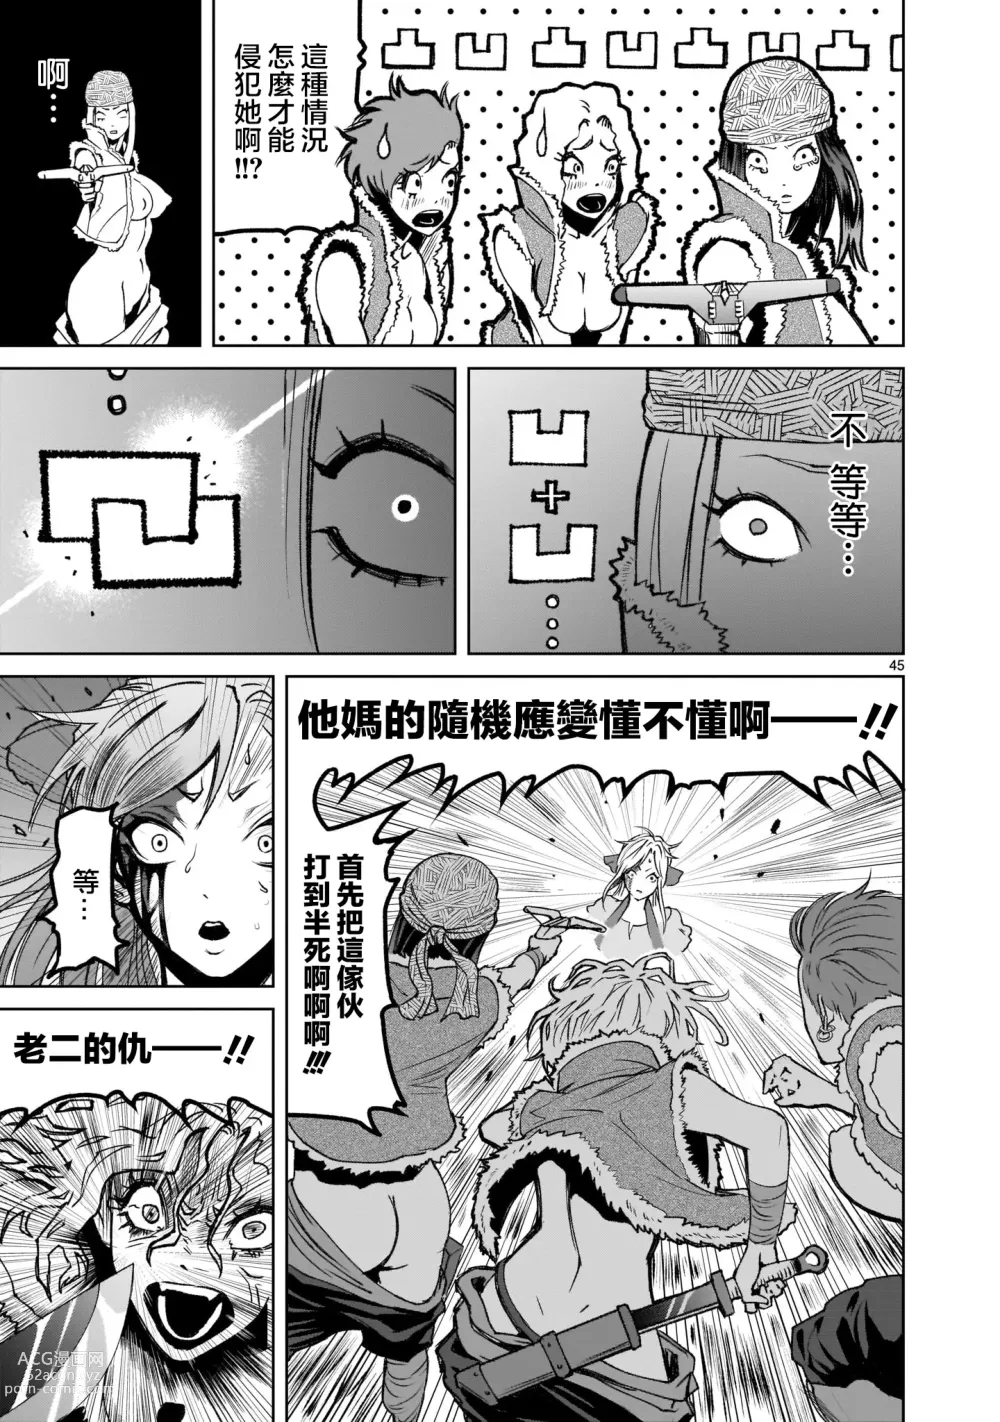 Page 41 of doujinshi 蔷薇园传奇 01Chinese